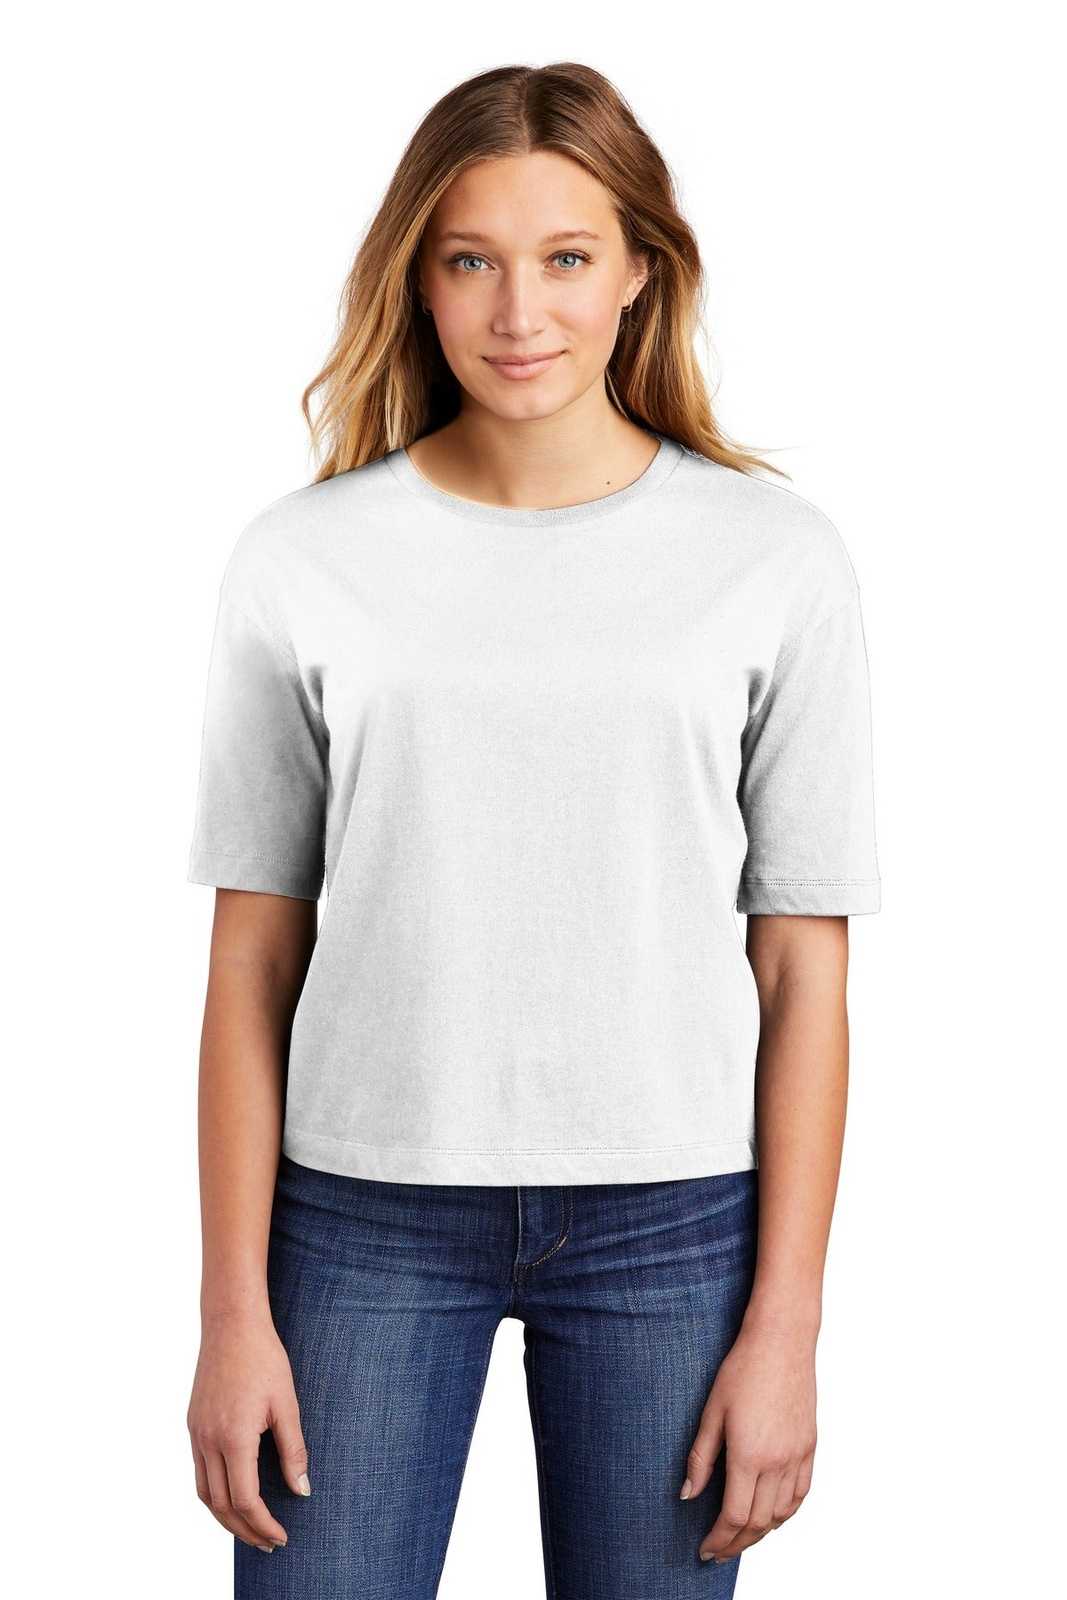 District DT6402 Women's V.I.T. Boxy Tee - White - HIT a Double - 1